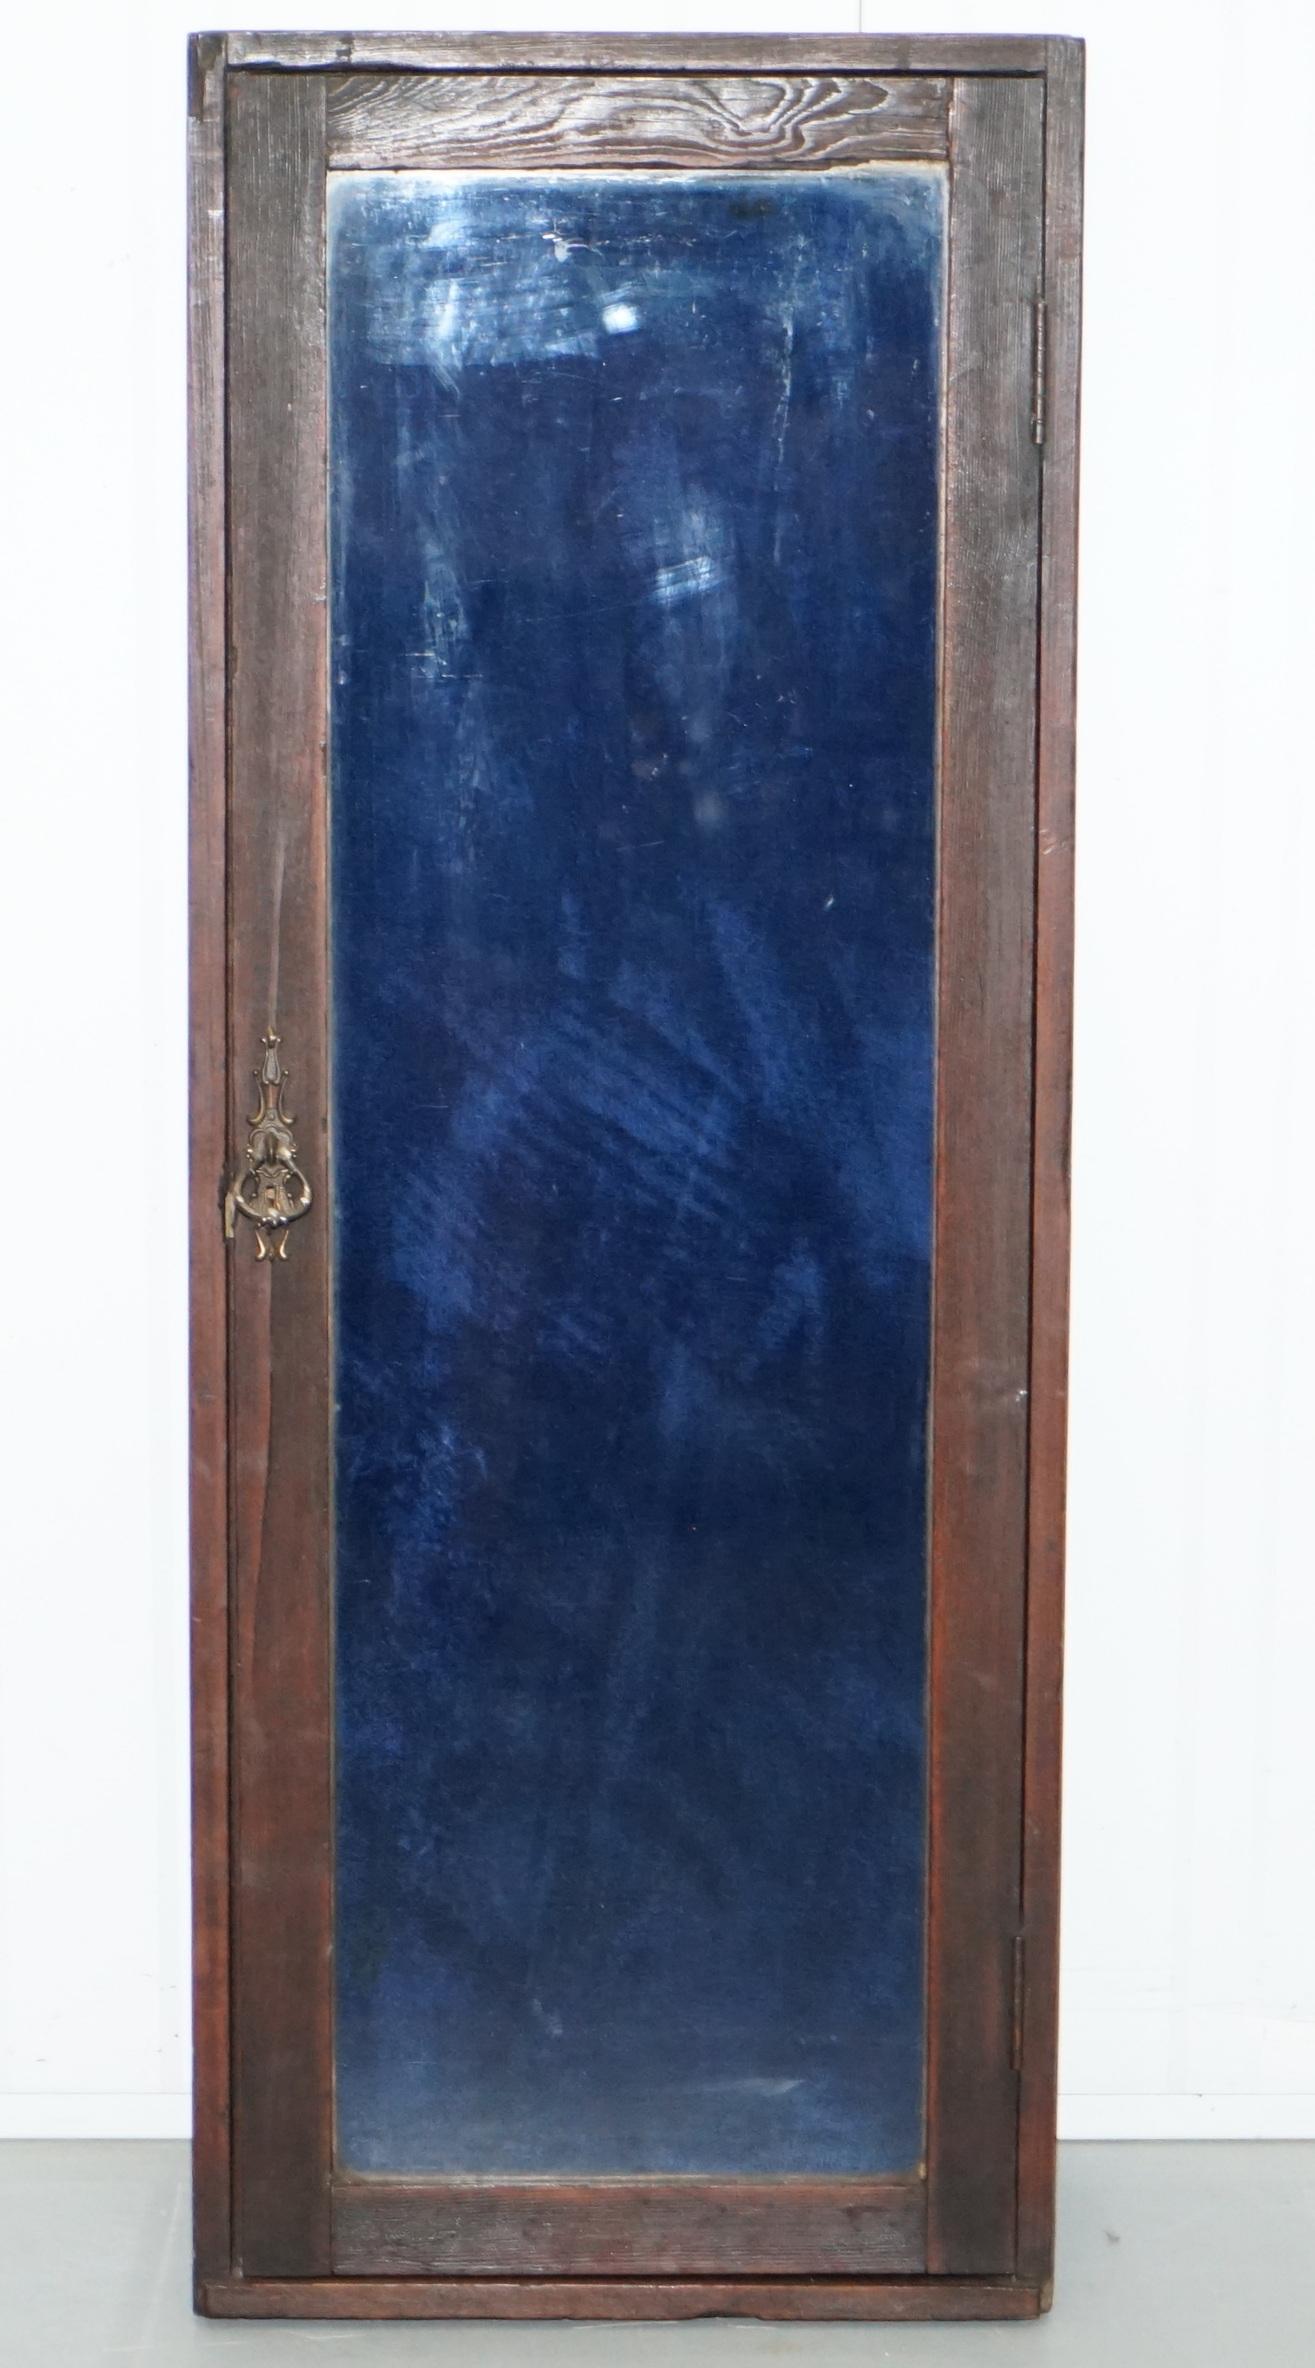 We are delighted to offer for sale this very nice old English blue velvet lined oak display collectors cabinet

A very decorative and well made piece, quite provincially made, the cabinet has the original key, these cabinets are used to display